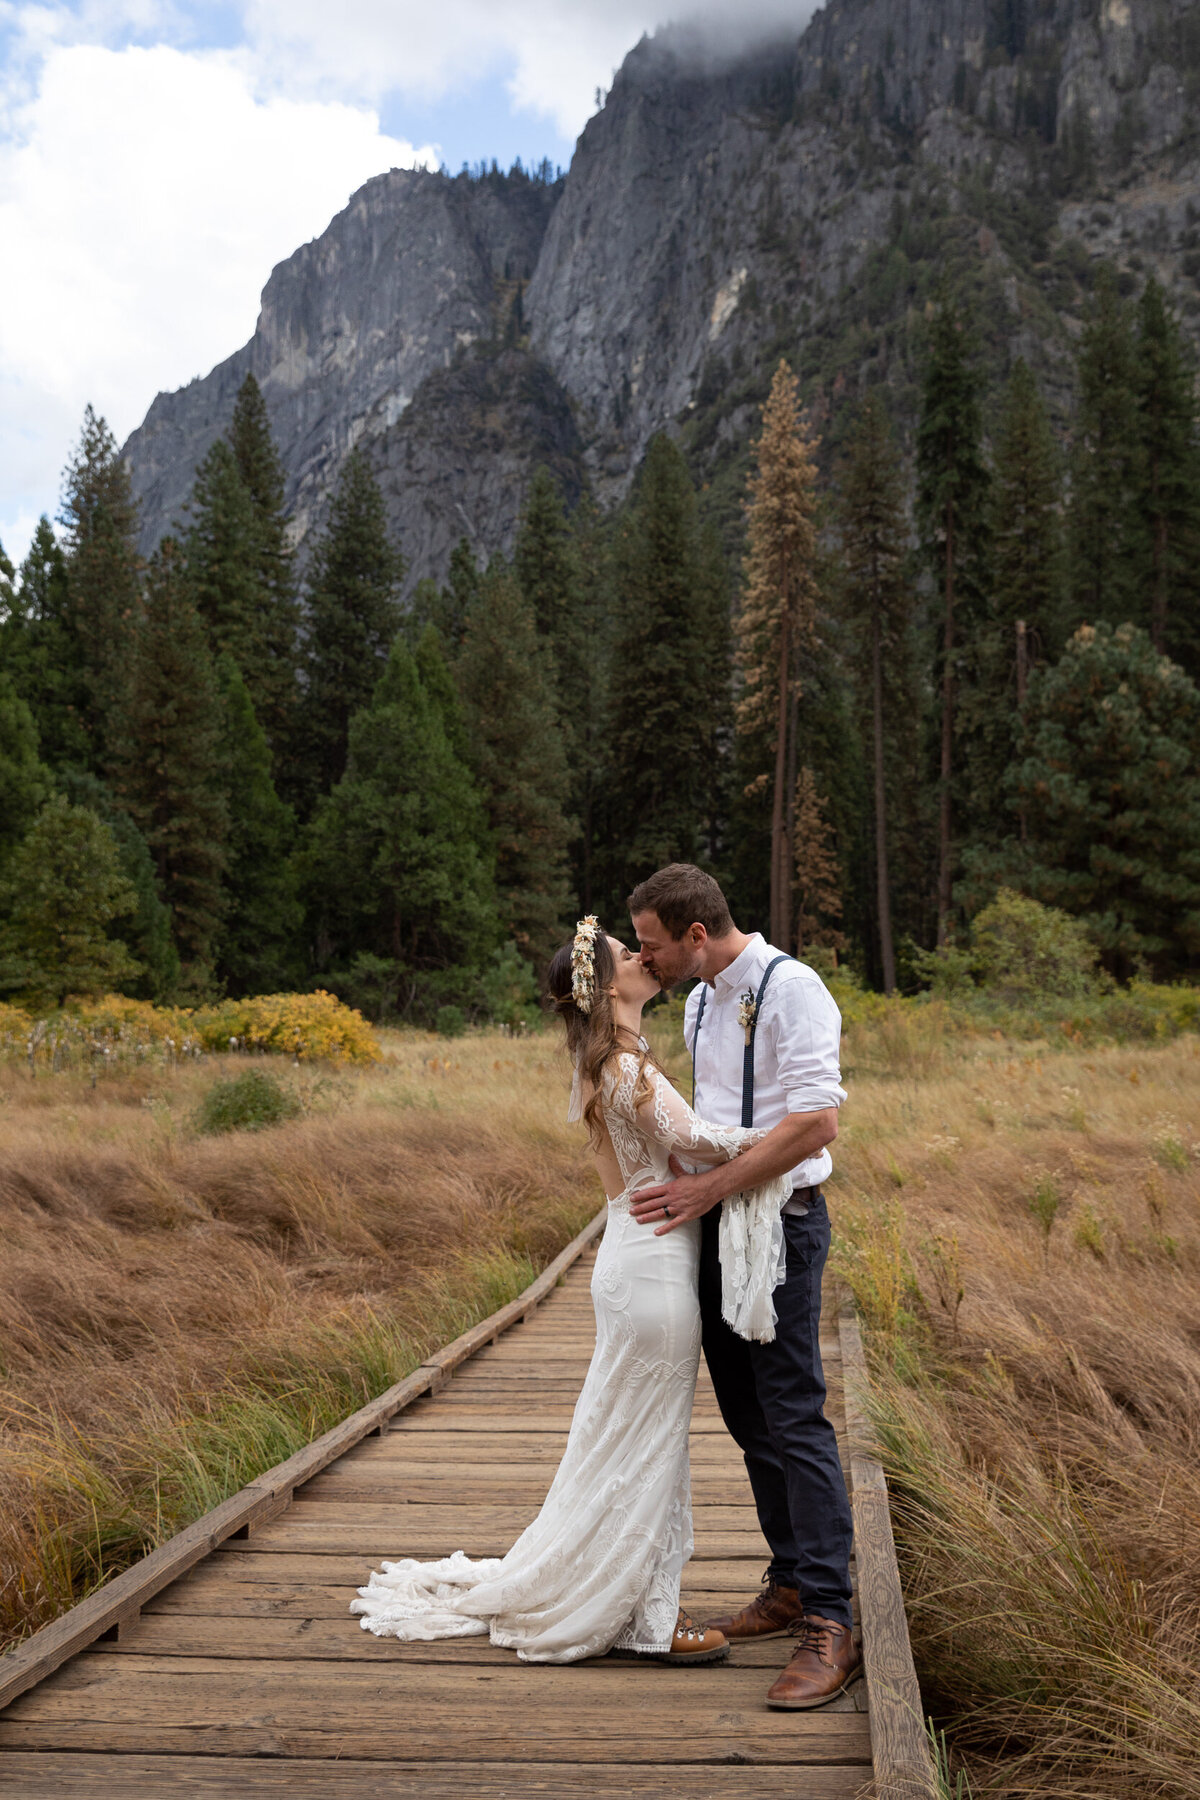 A bride and groom kiss while standing on a wooden boardwalk in a meadow in Yosemite.